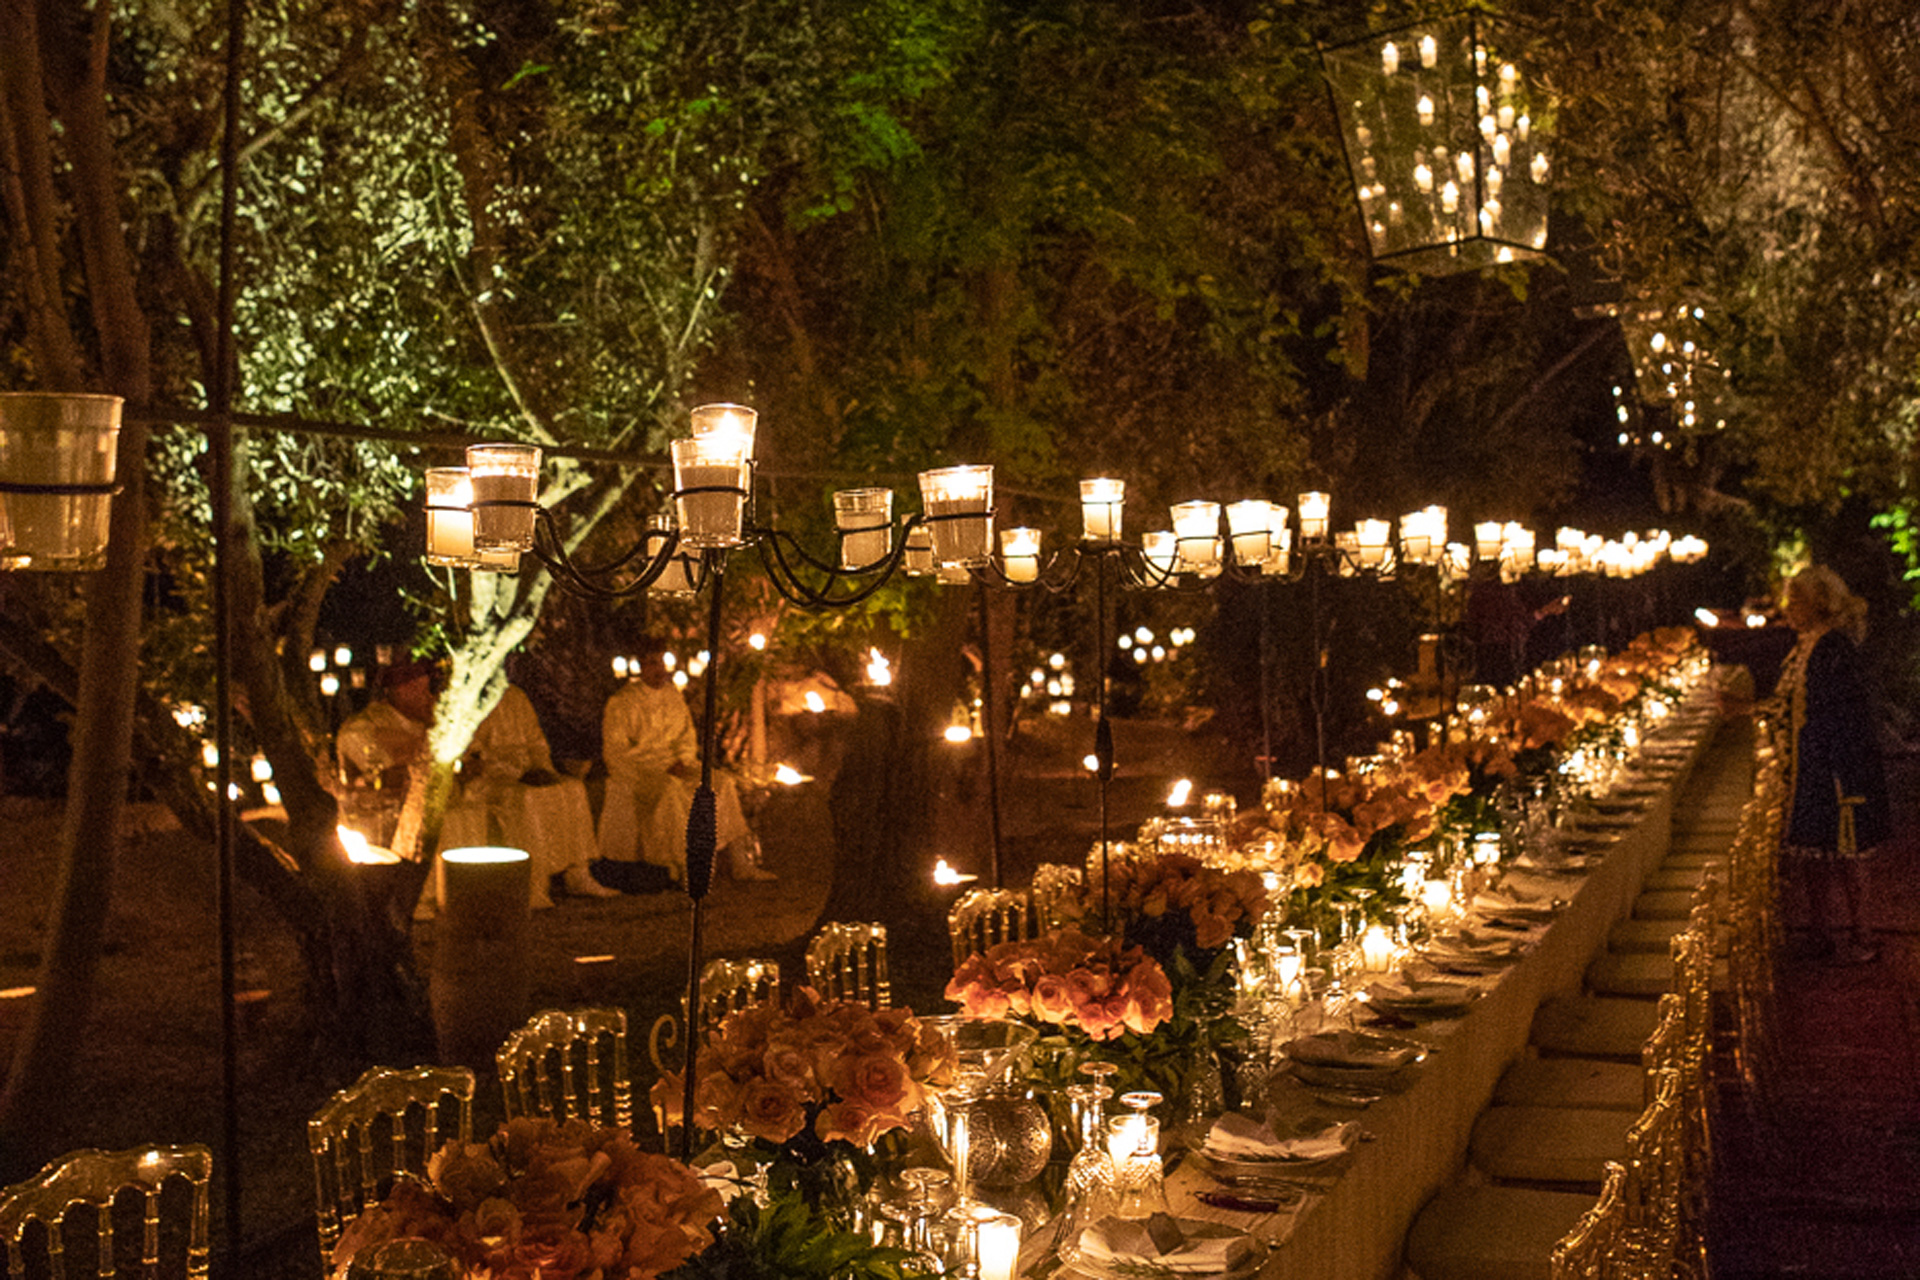 Long candlelit table outside surrounded by greenery, with lights hanging above